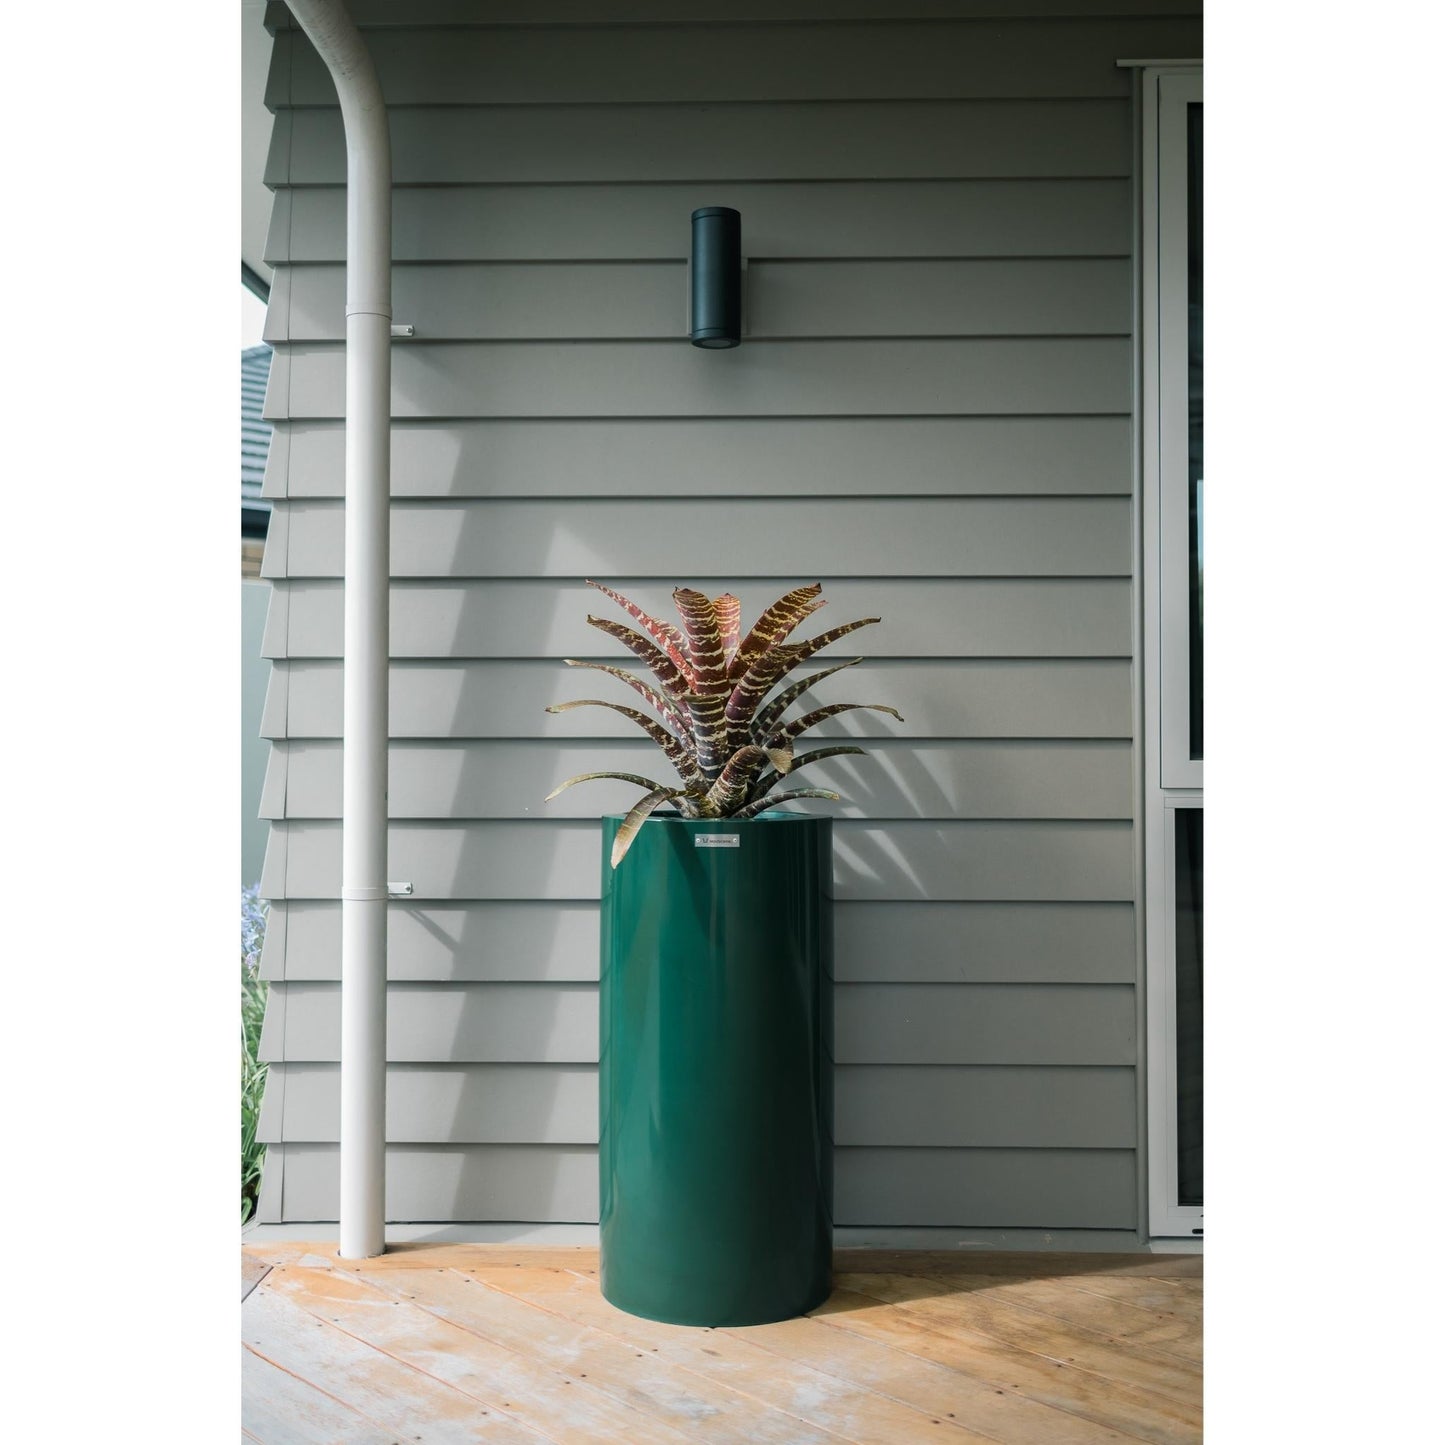 An emerald green cylinder planter pot sitting on a wooden deck in front of a house.